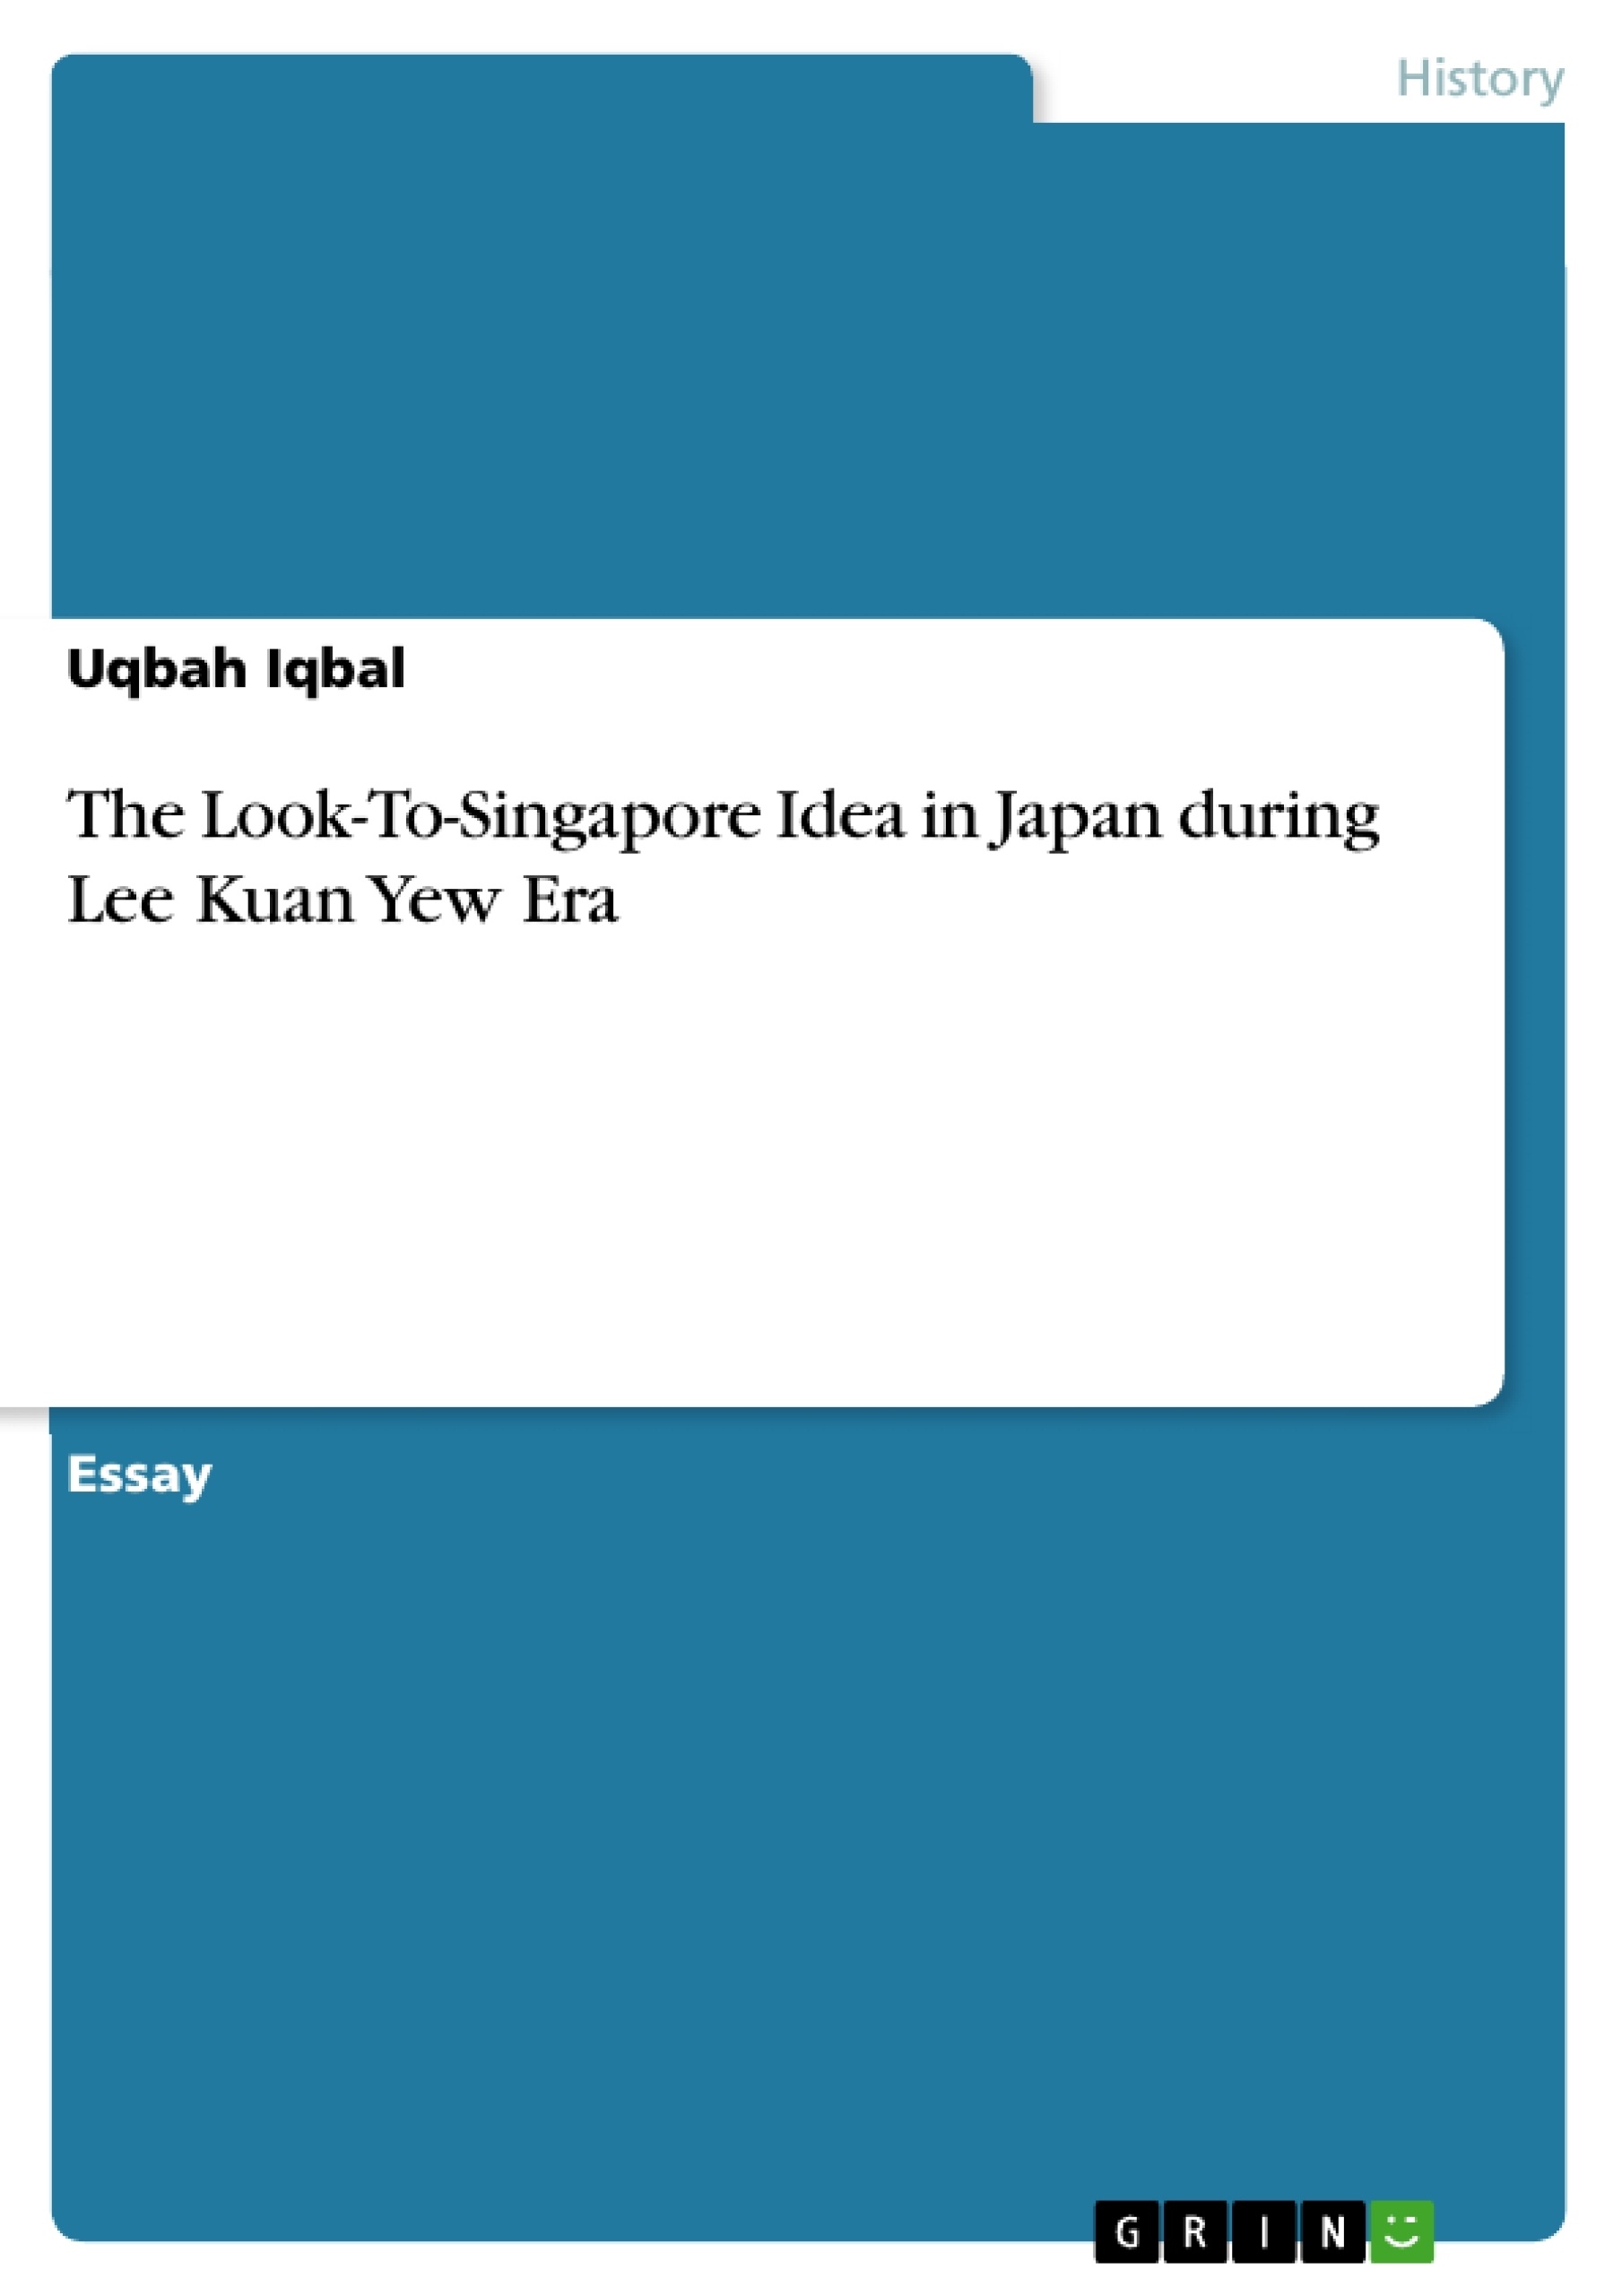 Titre: The Look-To-Singapore Idea in Japan during Lee Kuan Yew Era